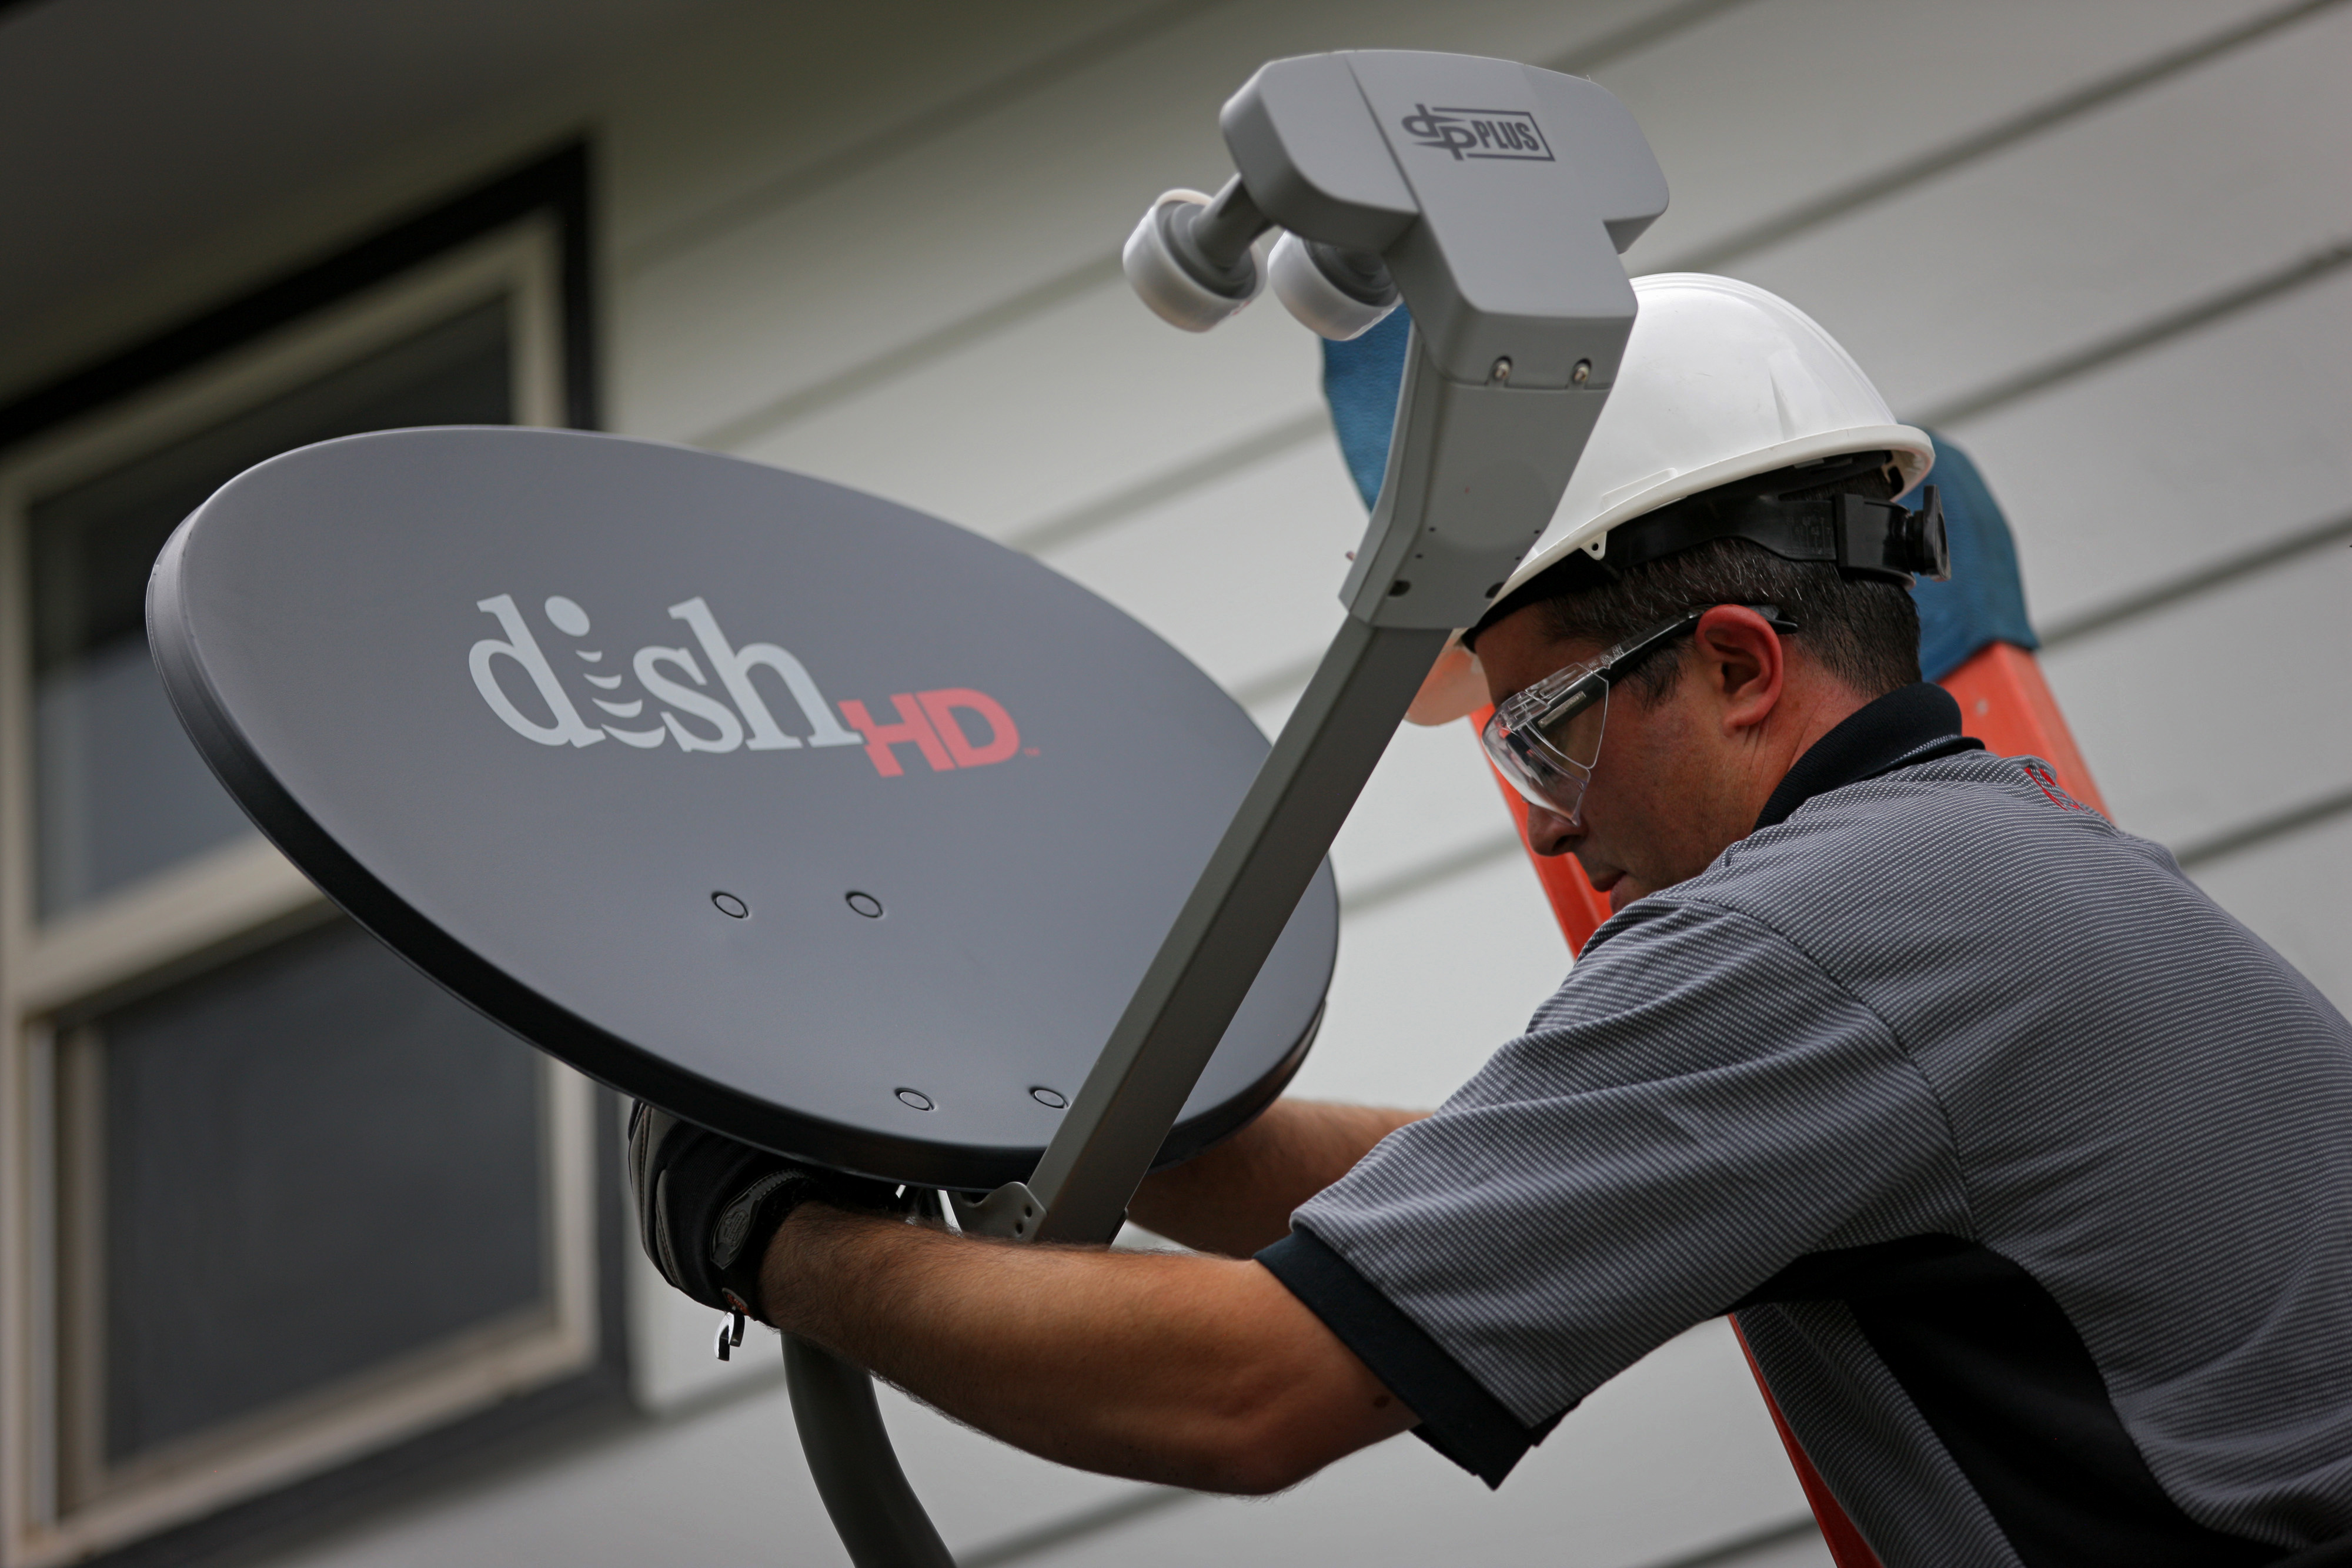 Justin Preziosi, field service specialist for Dish Network Corp., installs a satellite television system at a residence in Denver, Colorado, U.S., on Tuesday, Aug. 6, 2013. (Bloomberg—Bloomberg via Getty Images)